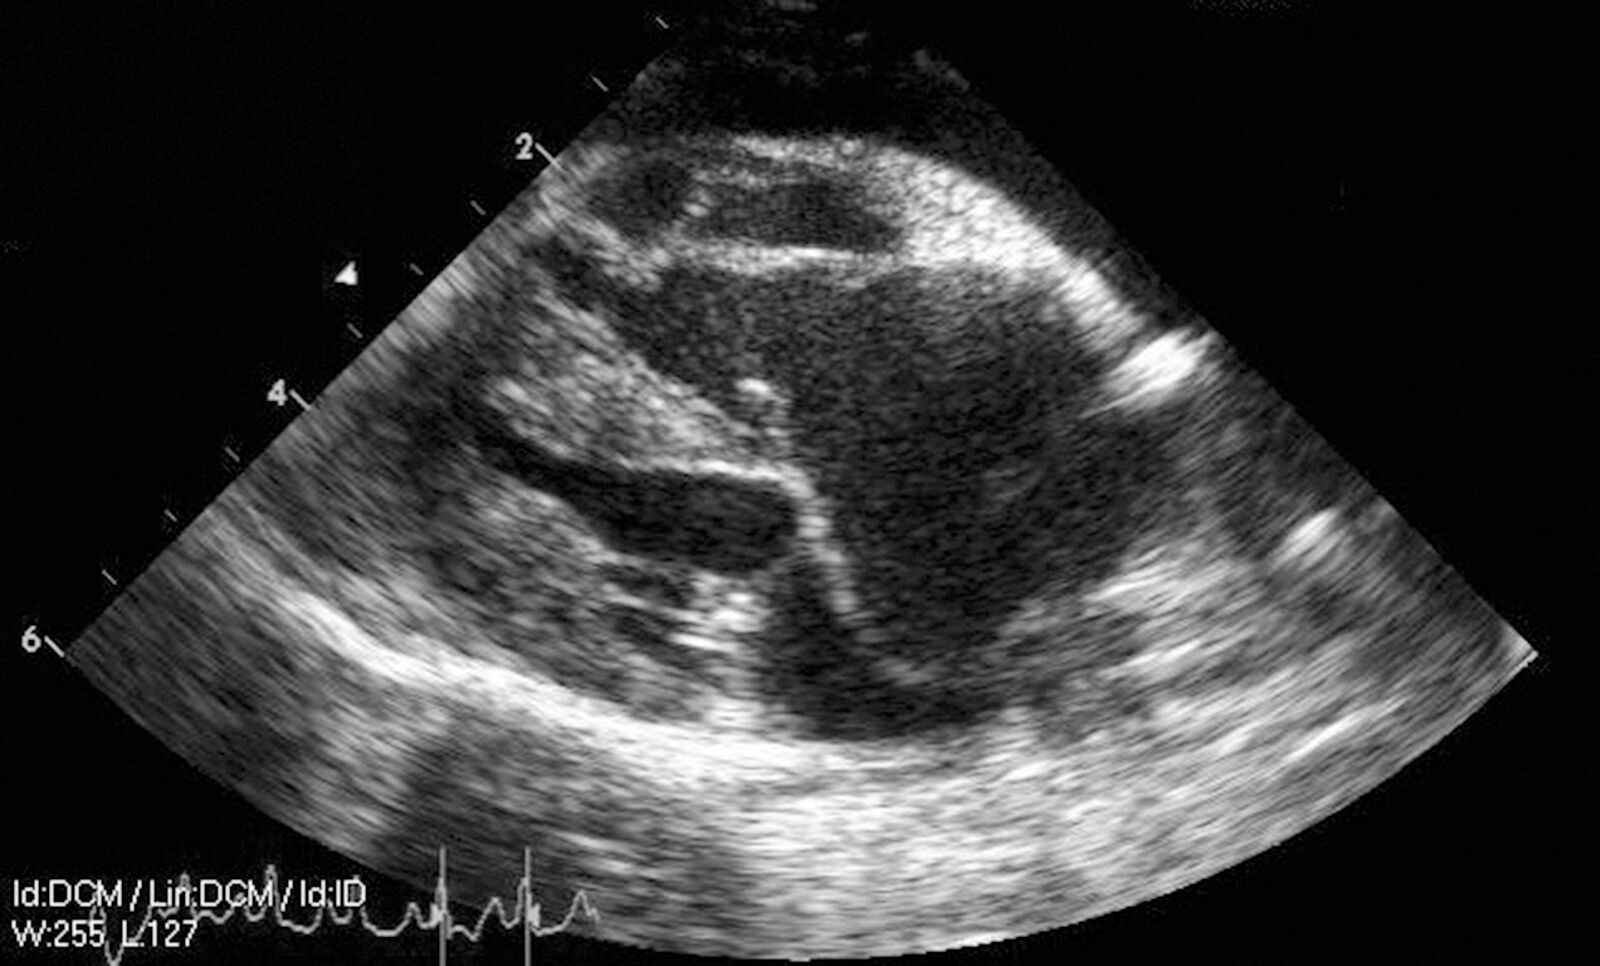 A right parasternal long axis echocardiographic view showing a severely enlarged right atrium and right ventricle secondary to tricuspid valve dysplasia.